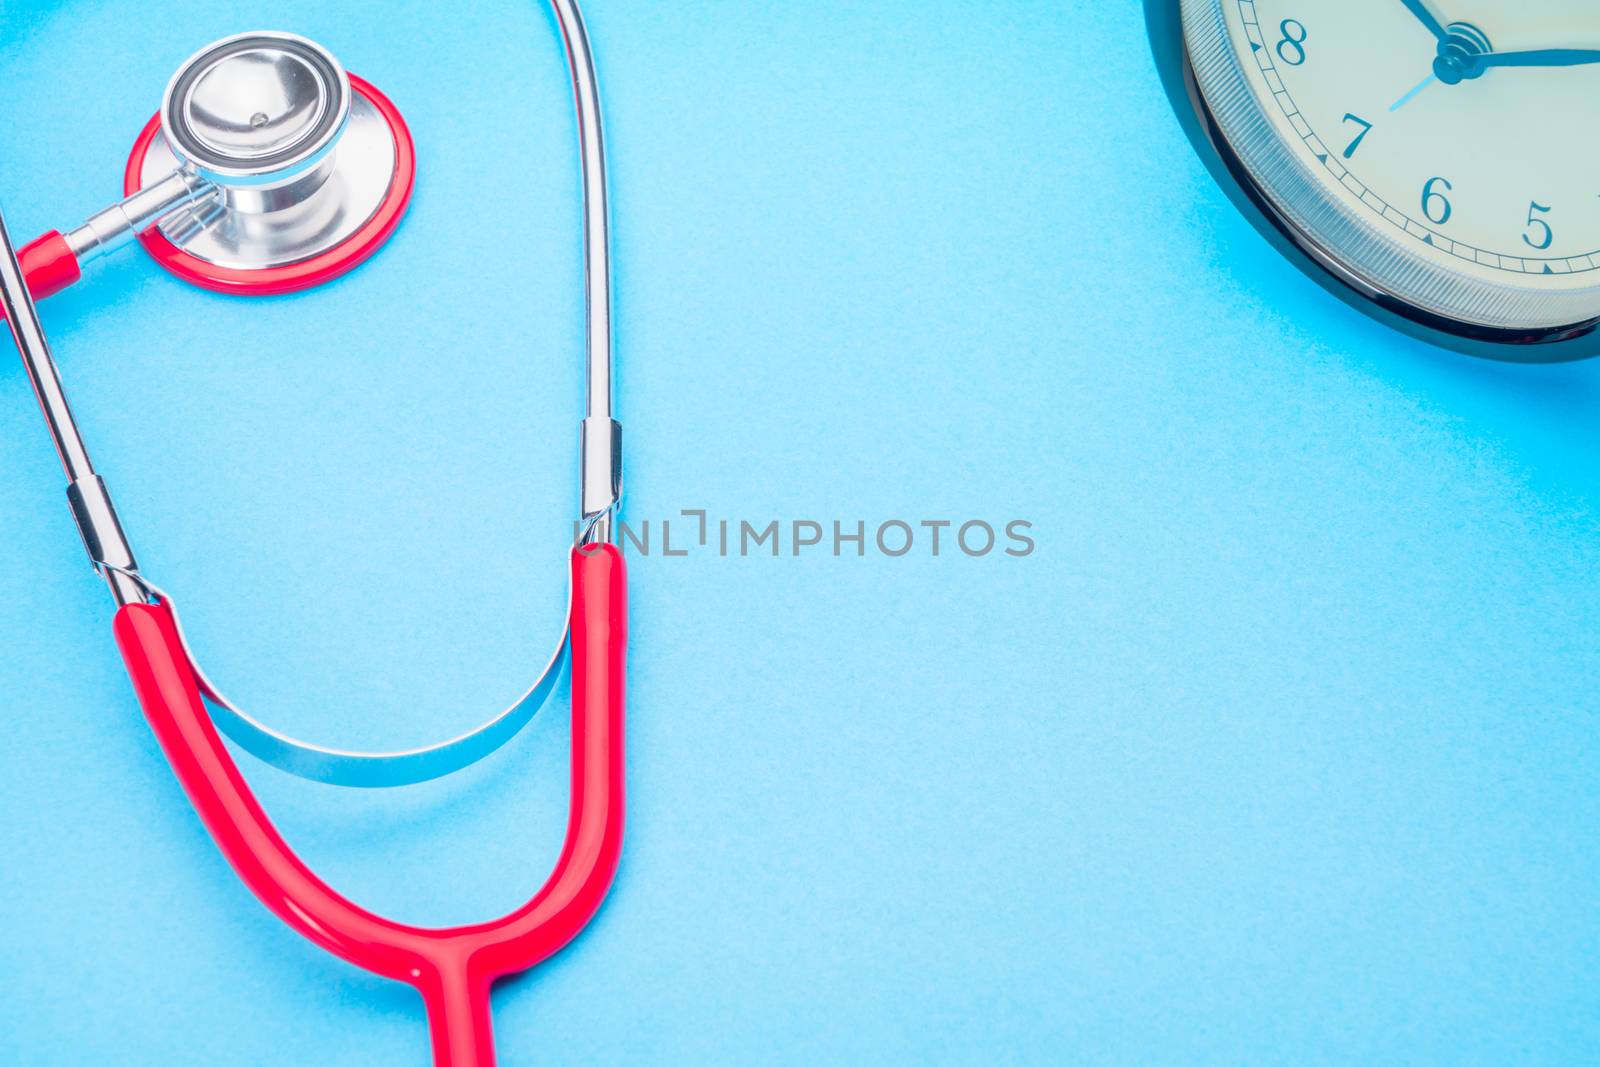 healthcare and medicine stethoscope and red heart symbol healthy by psodaz